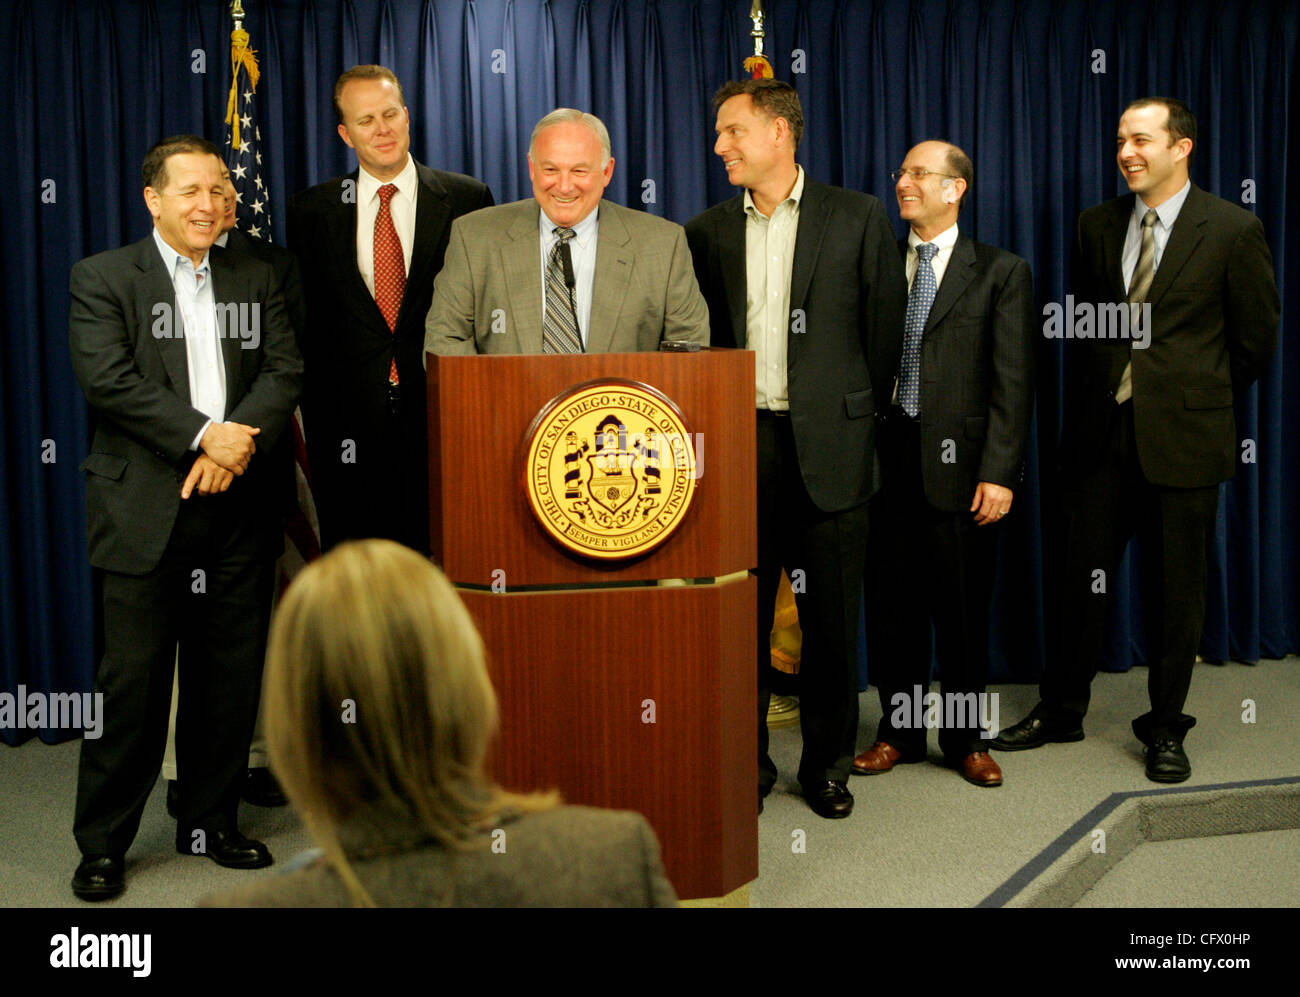 March 16, 2007 San Diego, CA San Diego city attorney MIKE AQUIRRE, left, council members JIM MADAFFER, KEVIN FAULCONER, Mayor JERRY SANDERS, center, council member SCOTT PETERS, chief financial officer JAY GOLDSTONE, and deputy comptroller GREG LEVIN, right, are 'all smiles', during a press conferen Stock Photo